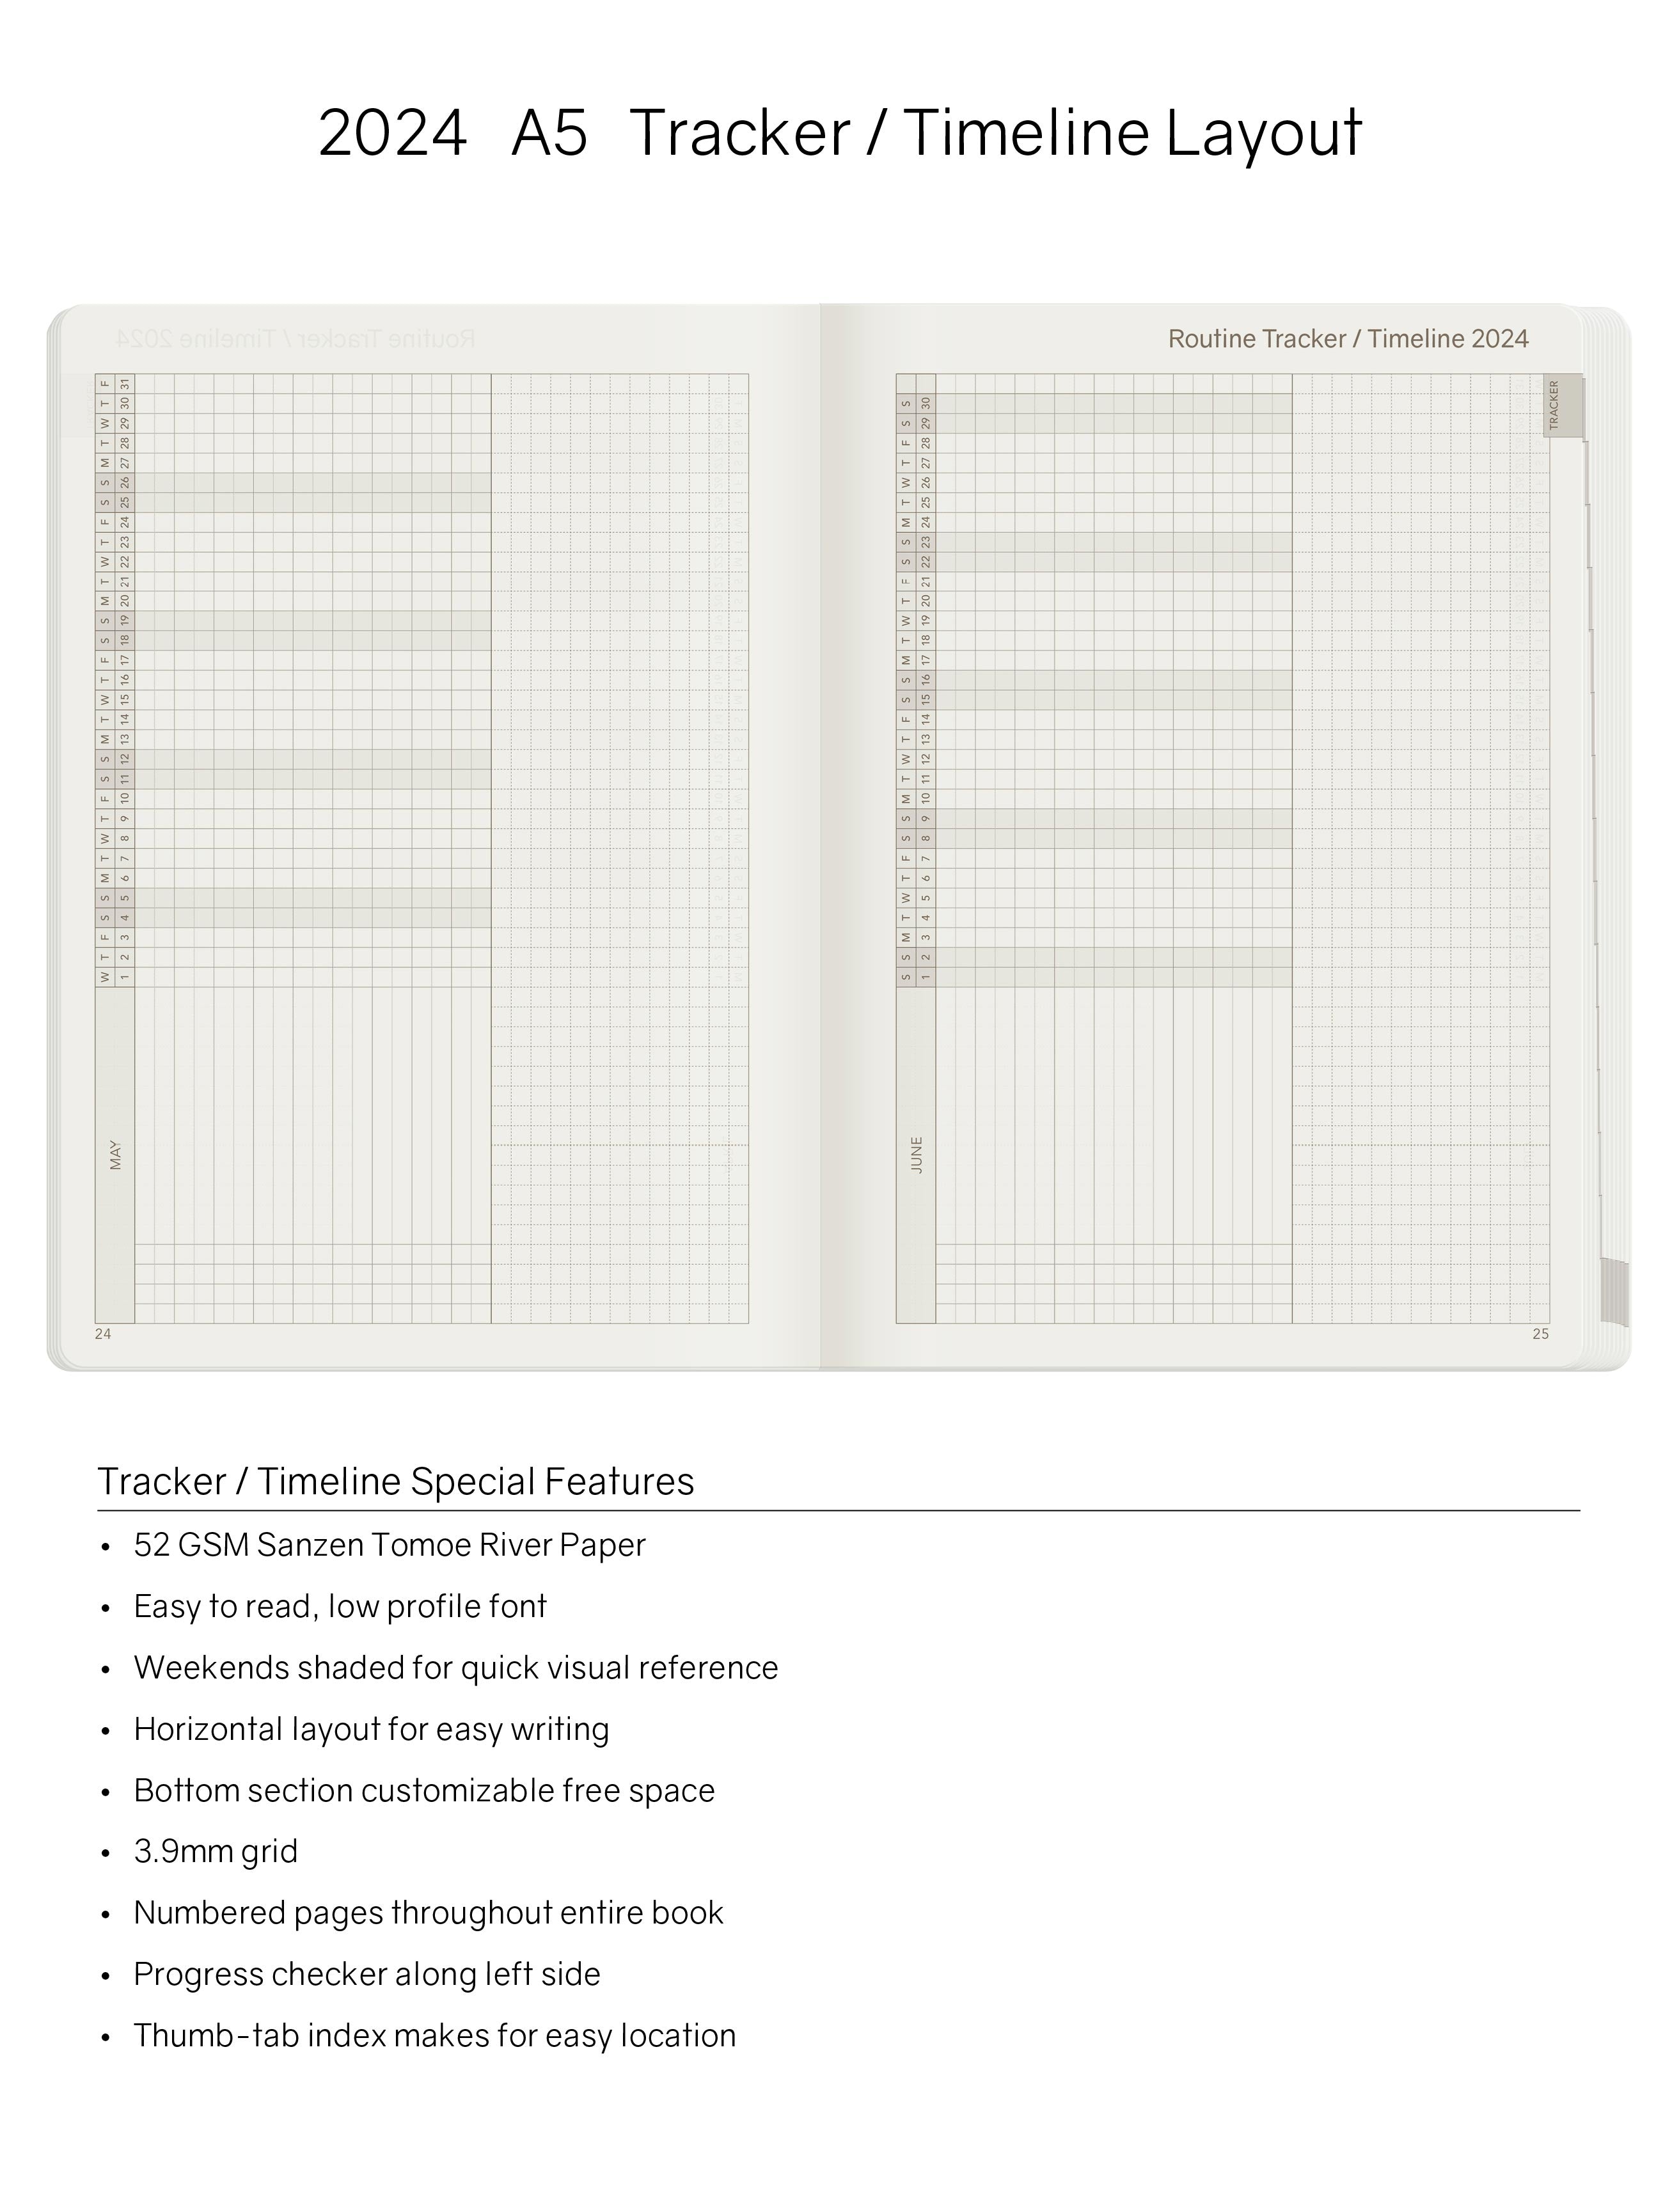 2024 A5 Weekly Planner -Wild Berry (Bordeaux)- 52gsm Tomoe River Paper (All in One Unstacked)